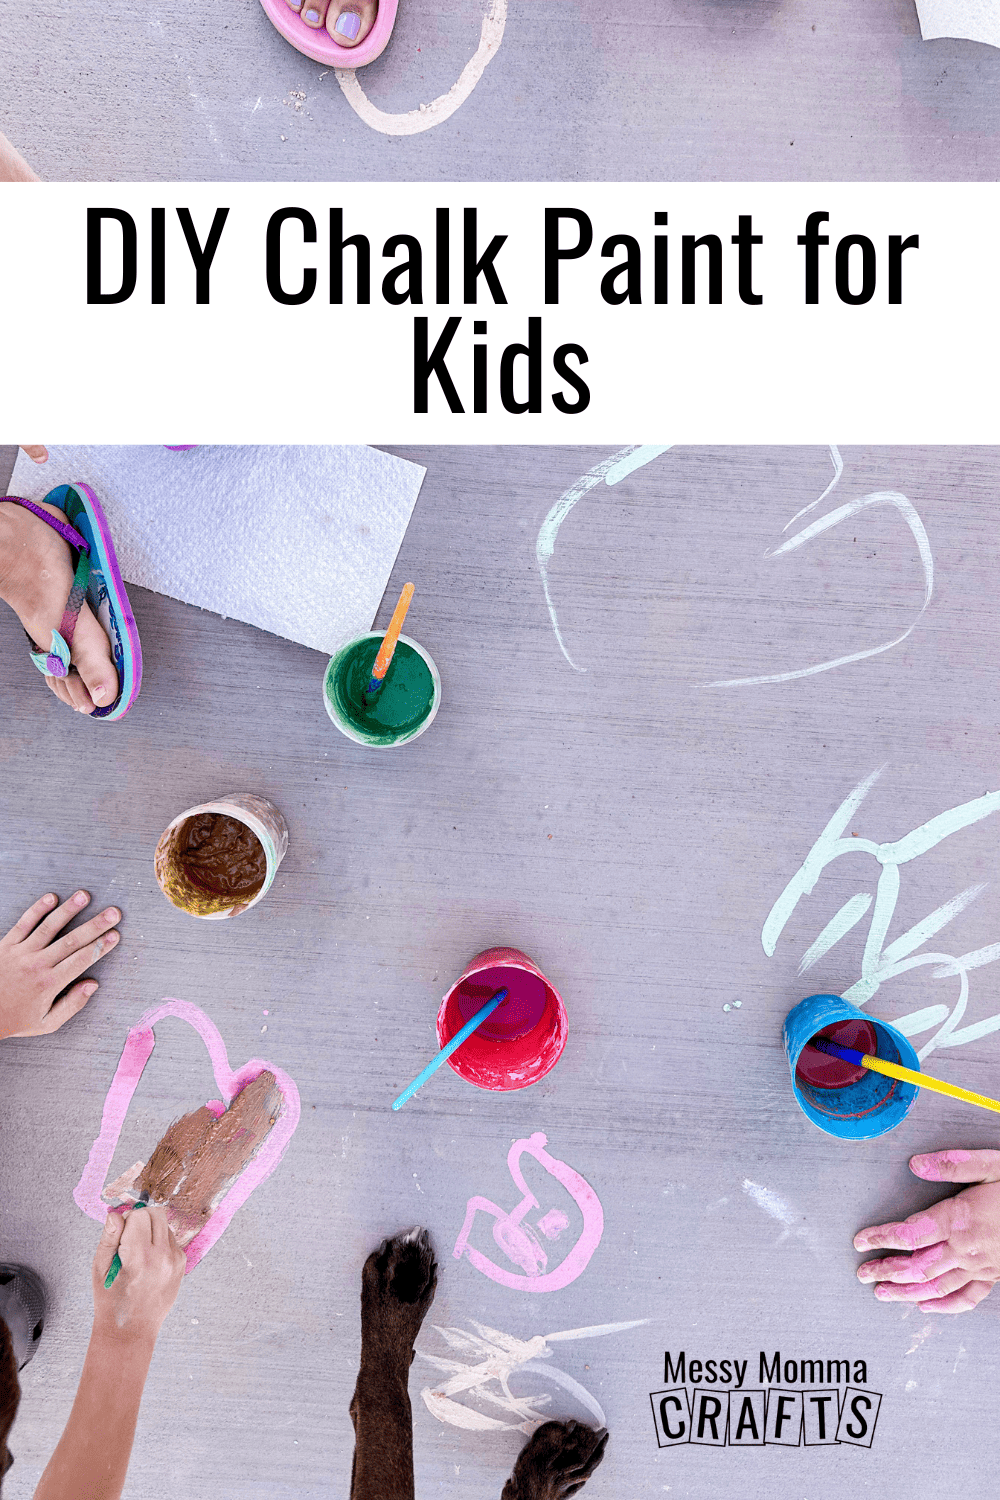 Kids drawing with chalk paint on cement